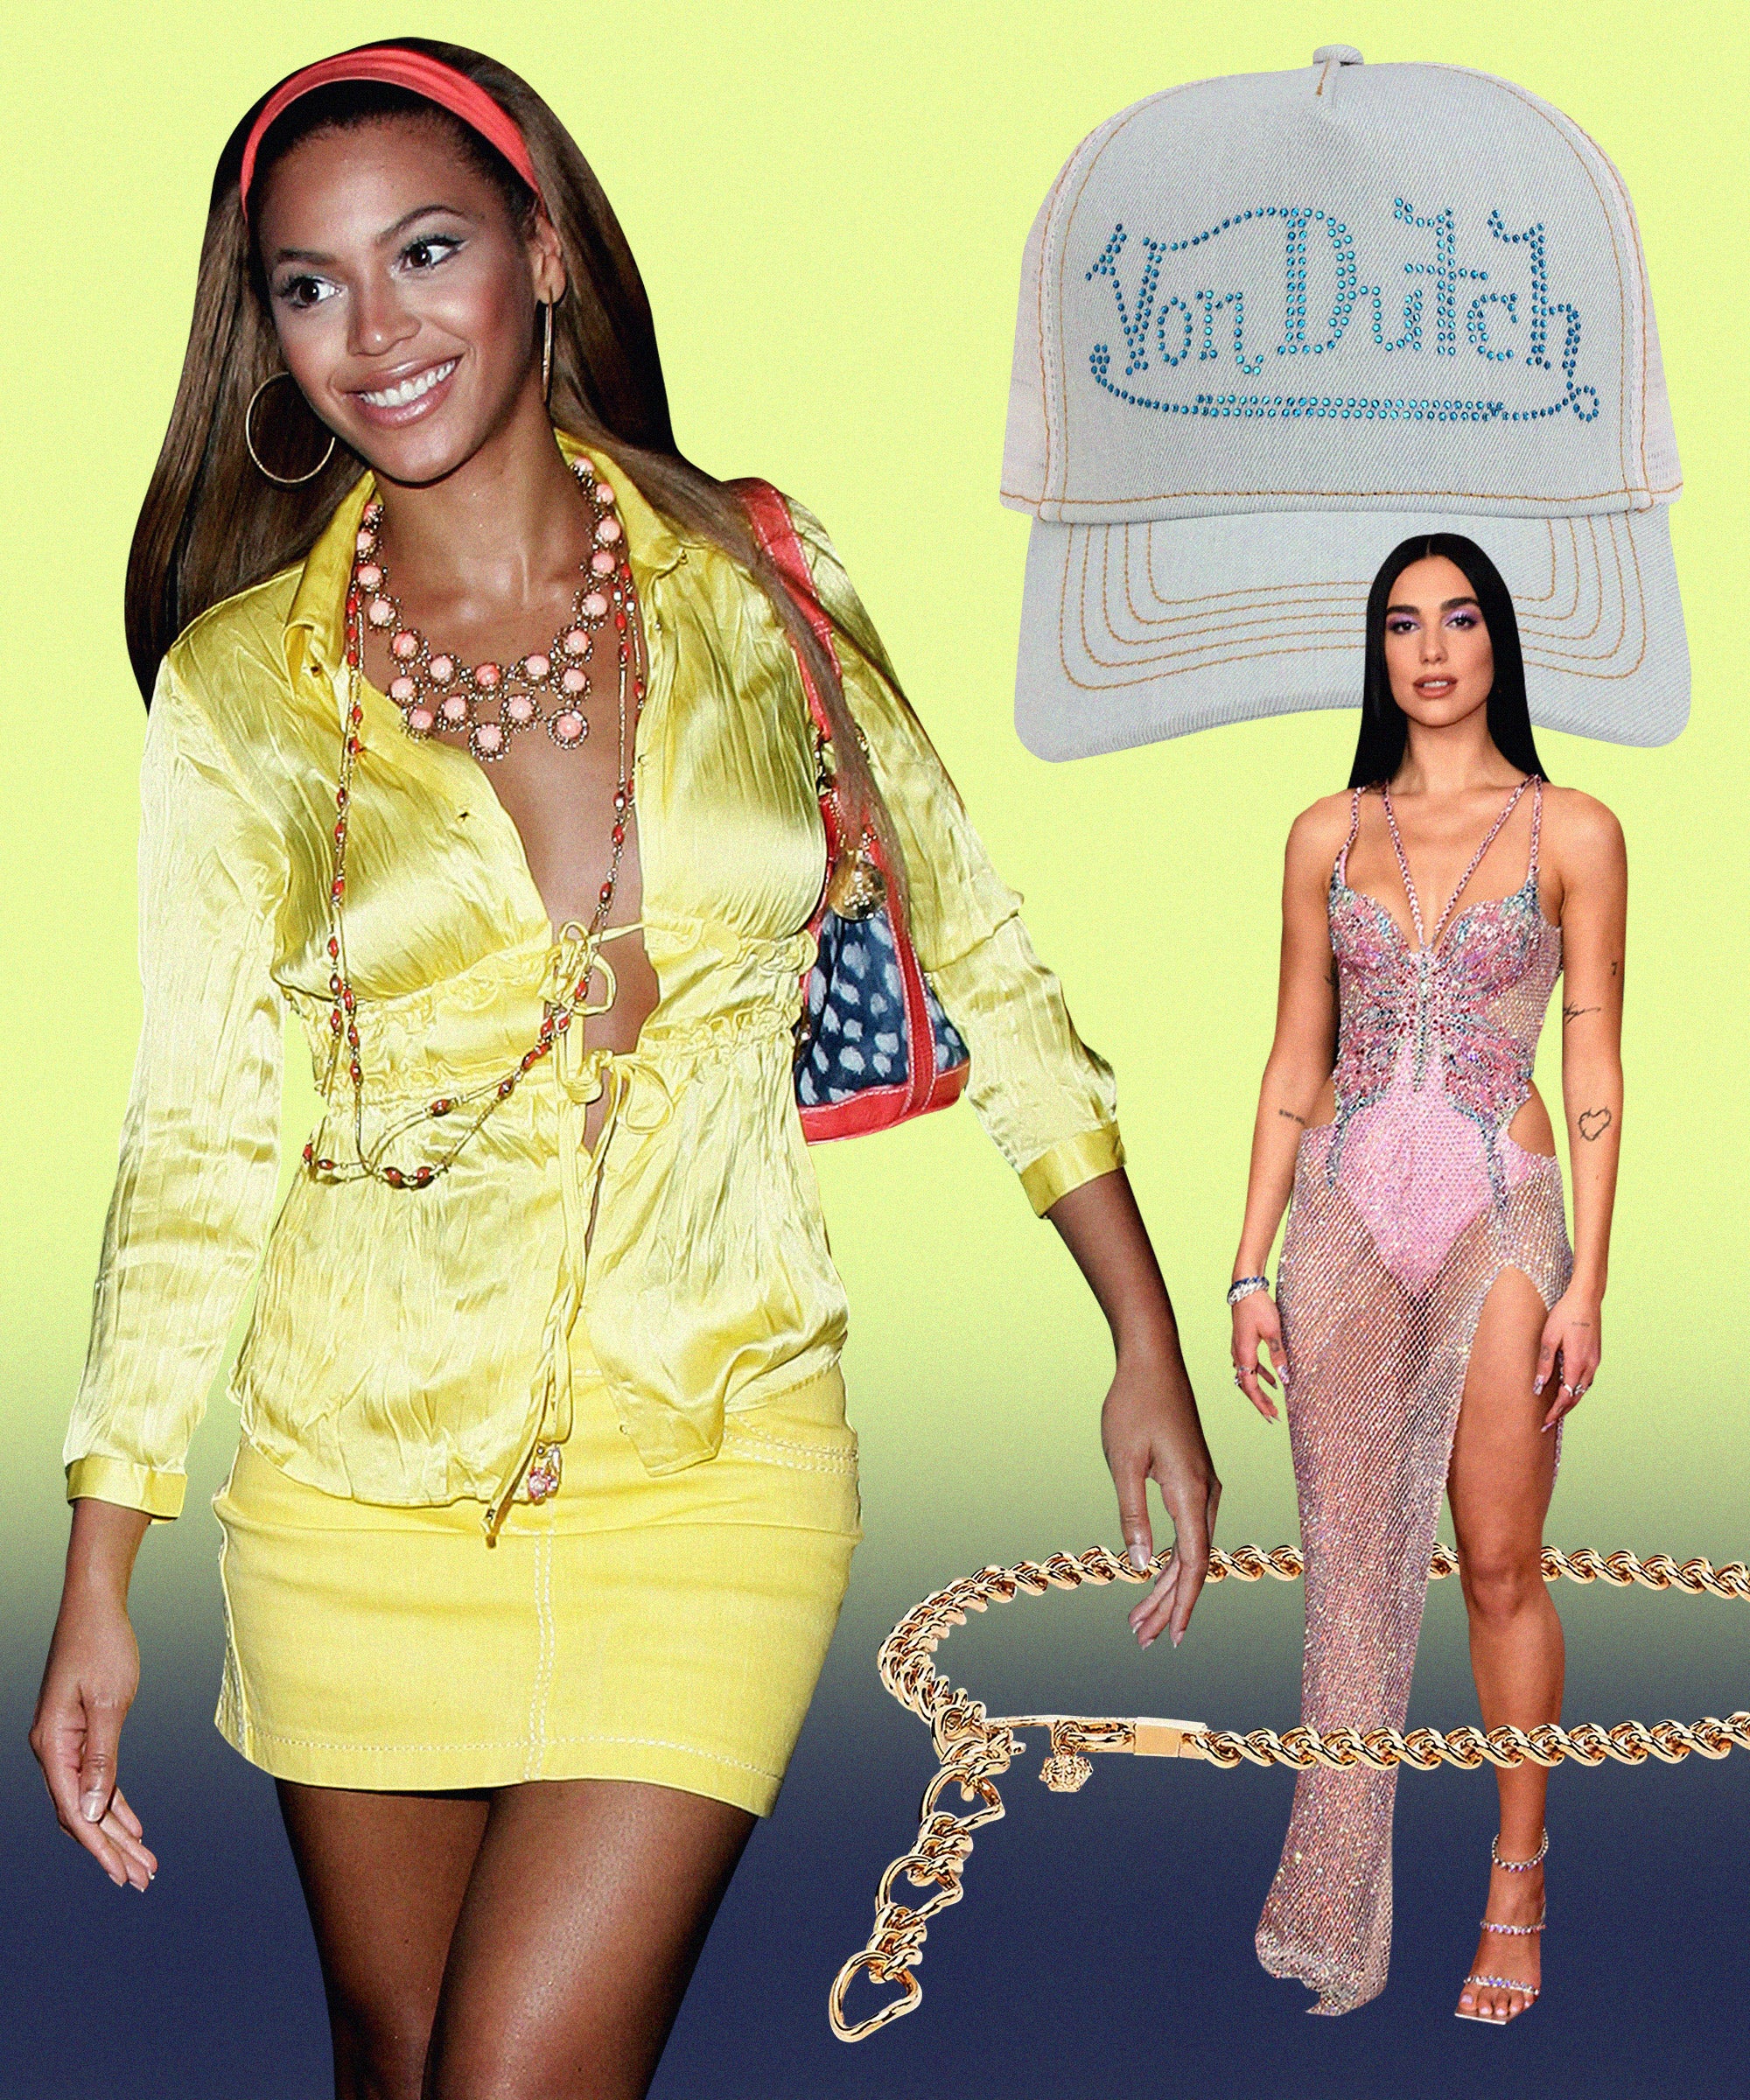 Y2K Fashion: Questionable '00s Trends That Have Returned